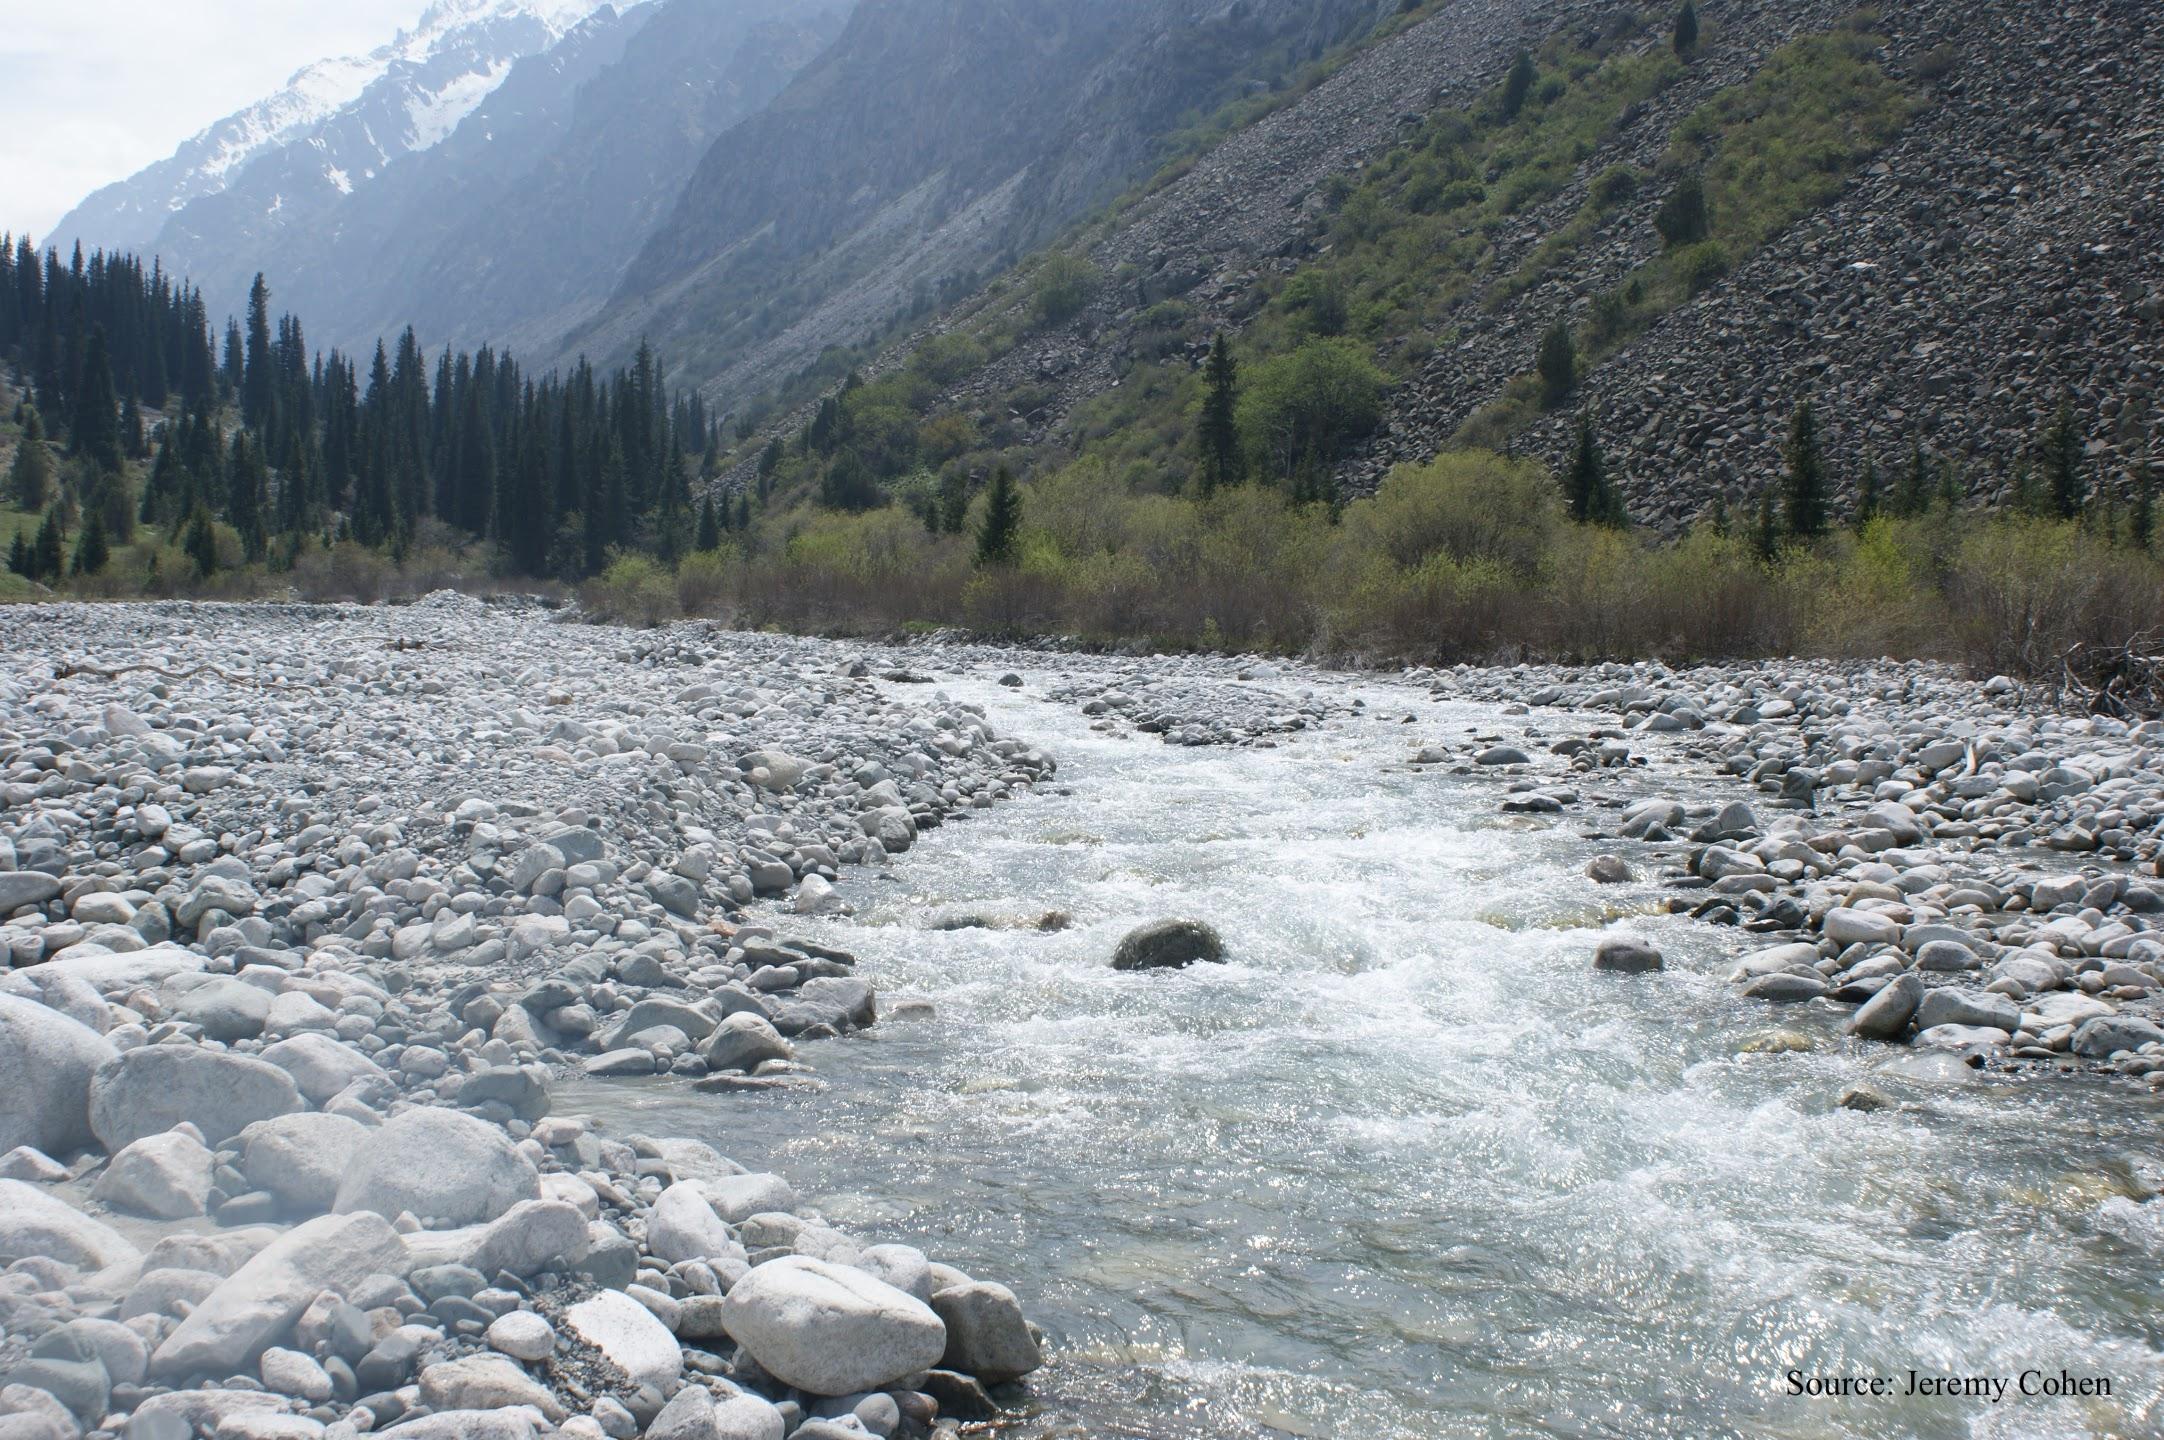 Bilateral Agreements Offer a Way Out of Central Asia’s Water Woes, But Are They Sustainable?